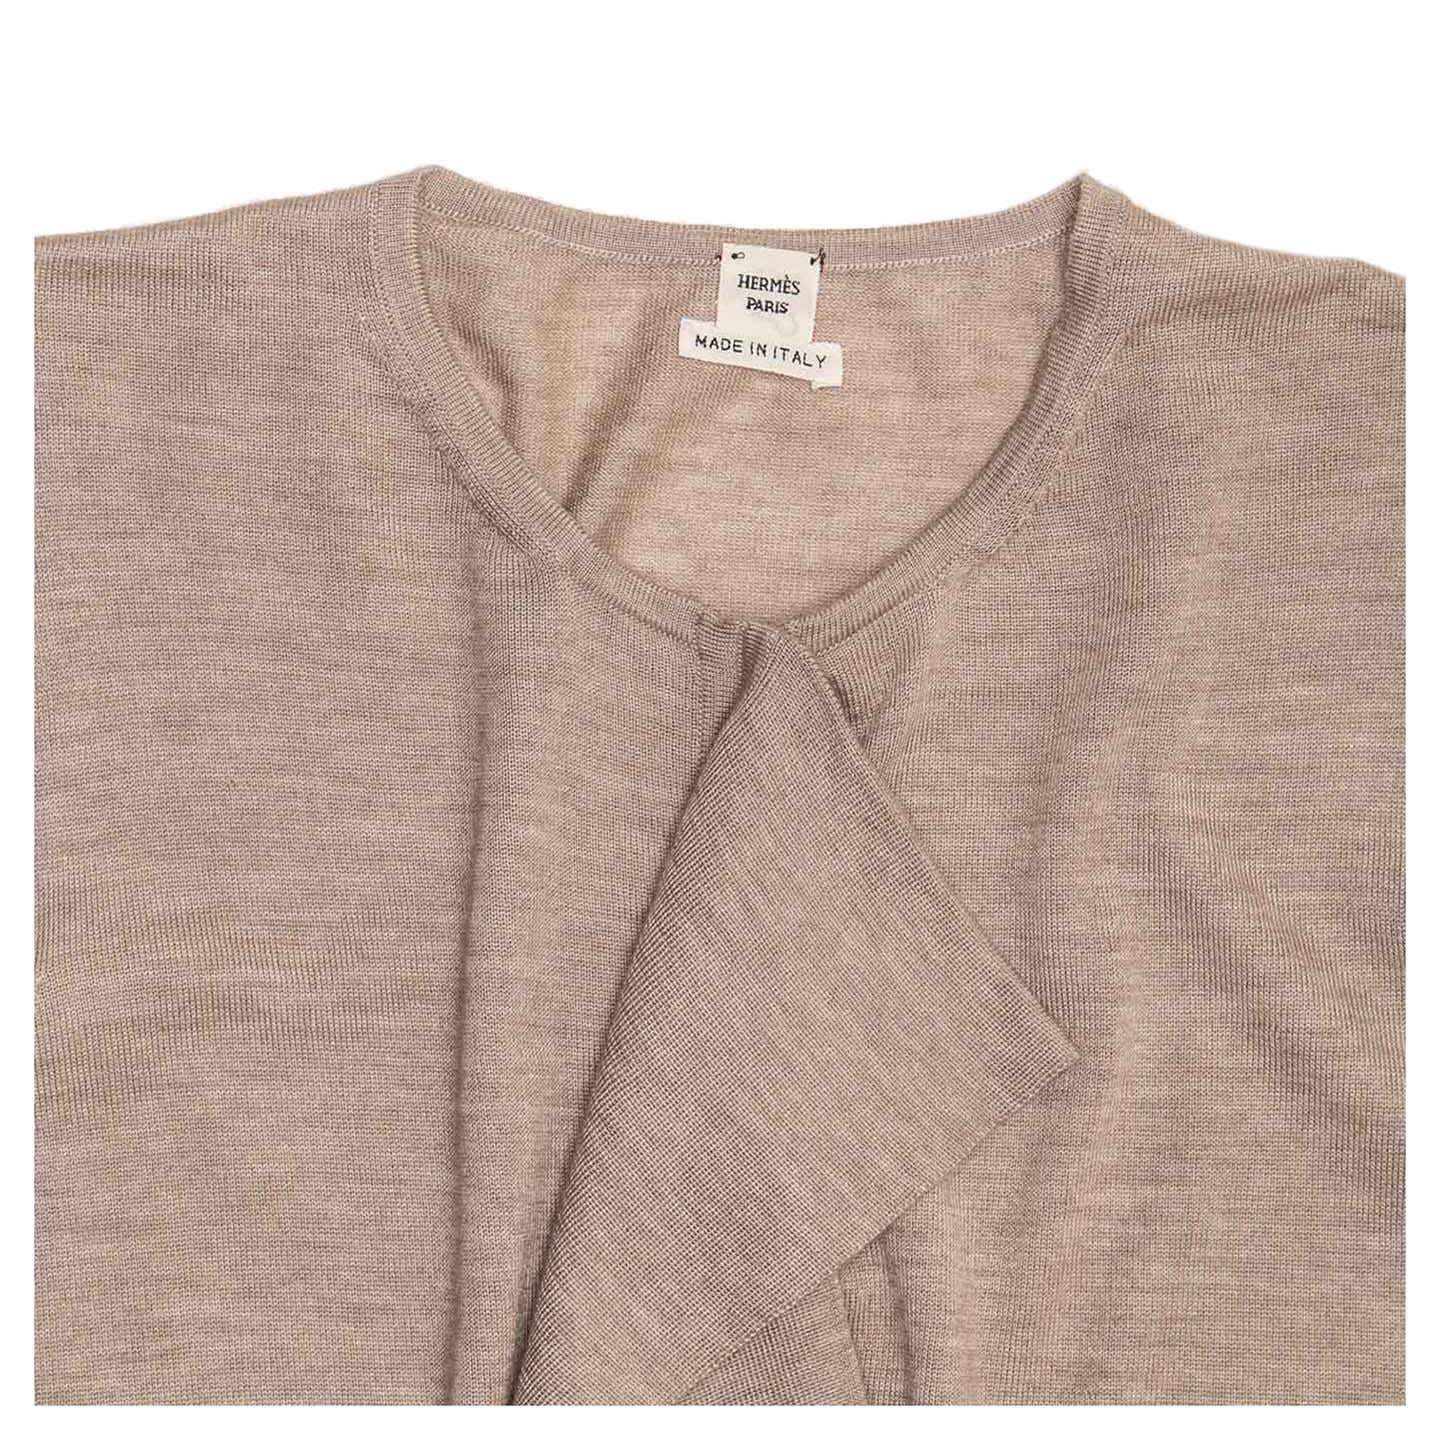 Hermès Sand Cashmere Sleeveless Sweater In New Condition For Sale In Brooklyn, NY